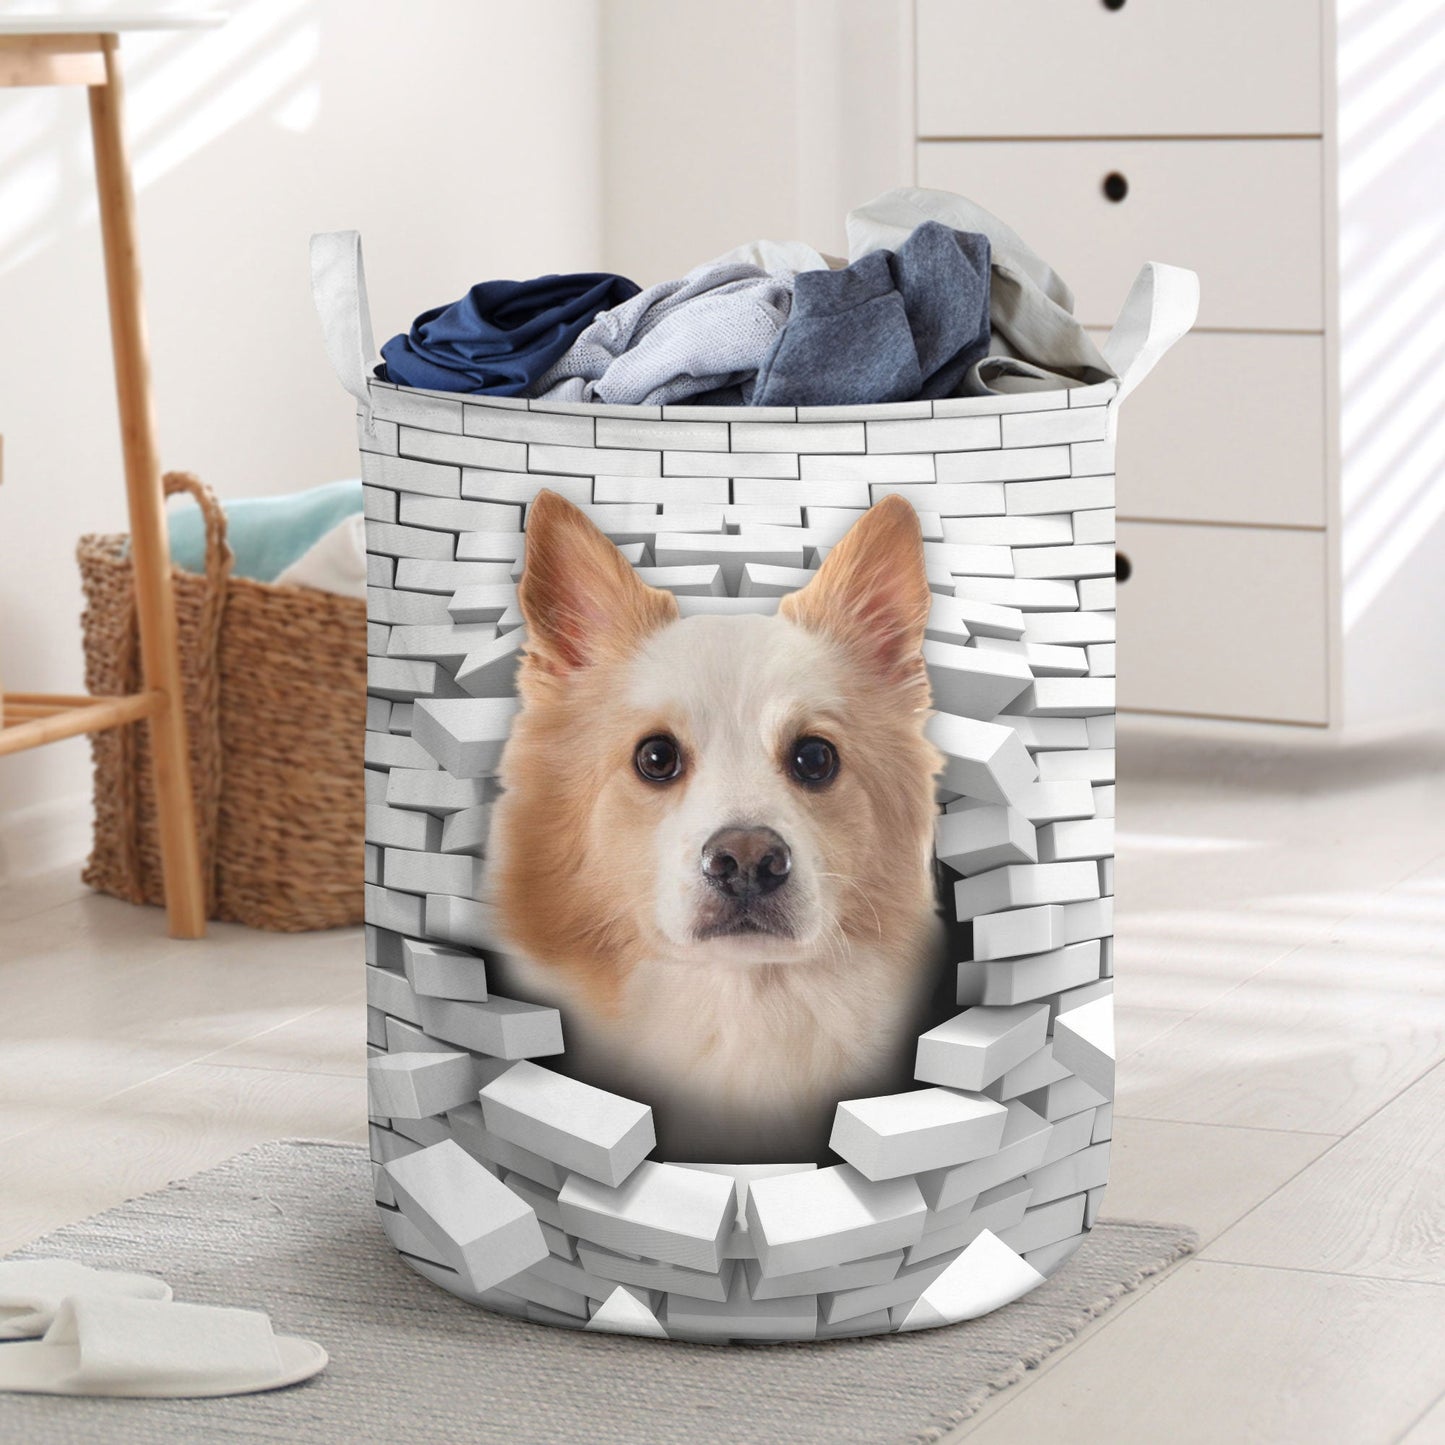 Icelandic Sheepdog - In The Hole Of Wall Pattern Laundry Basket